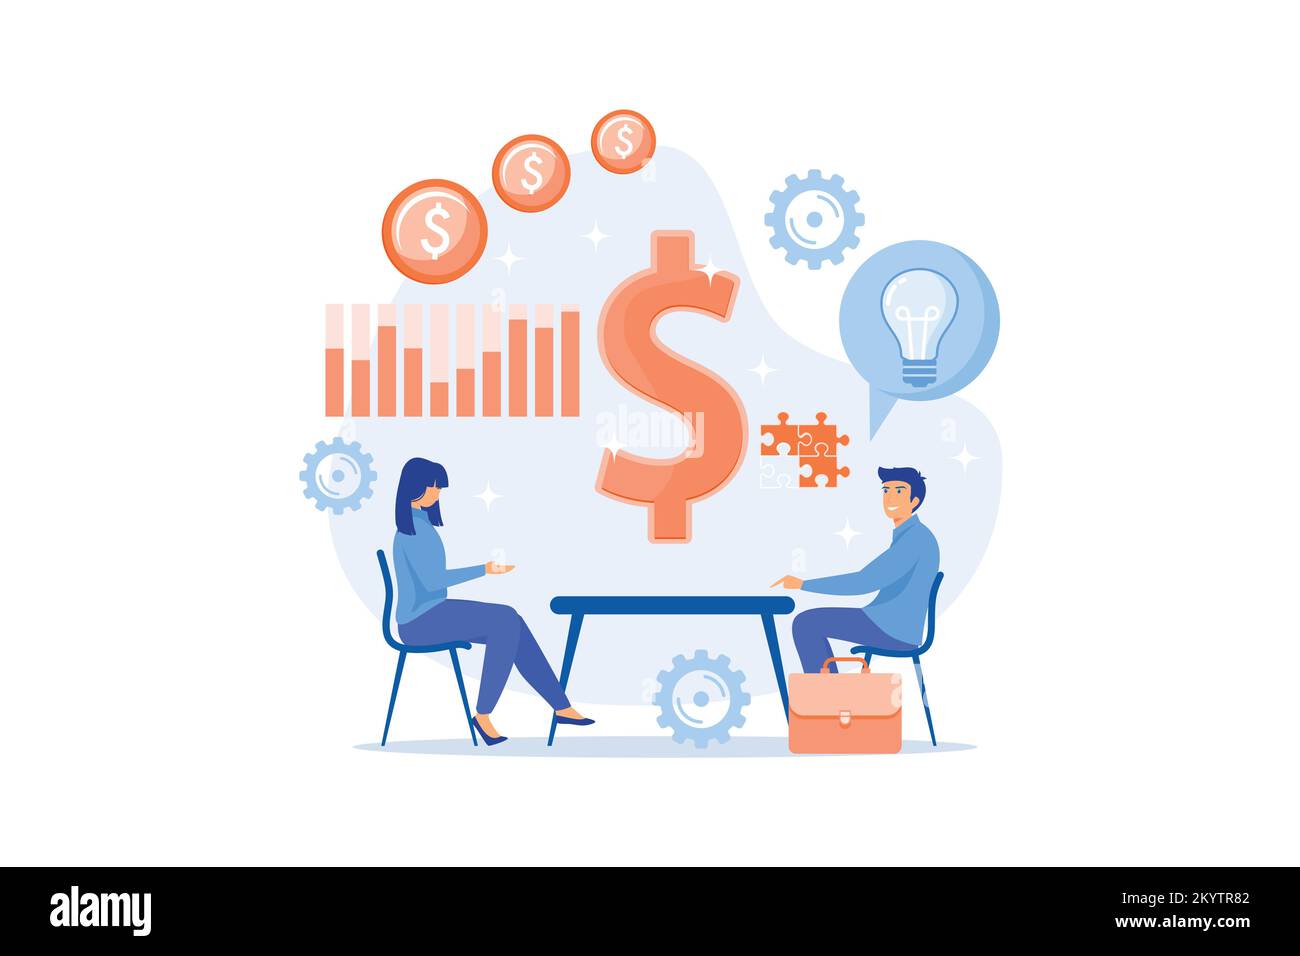 Salesperson suggesting a solution idea to consumers problem. Consultative sales, customer-oriented selling, trendy sales method concept. flat vector m Stock Vector